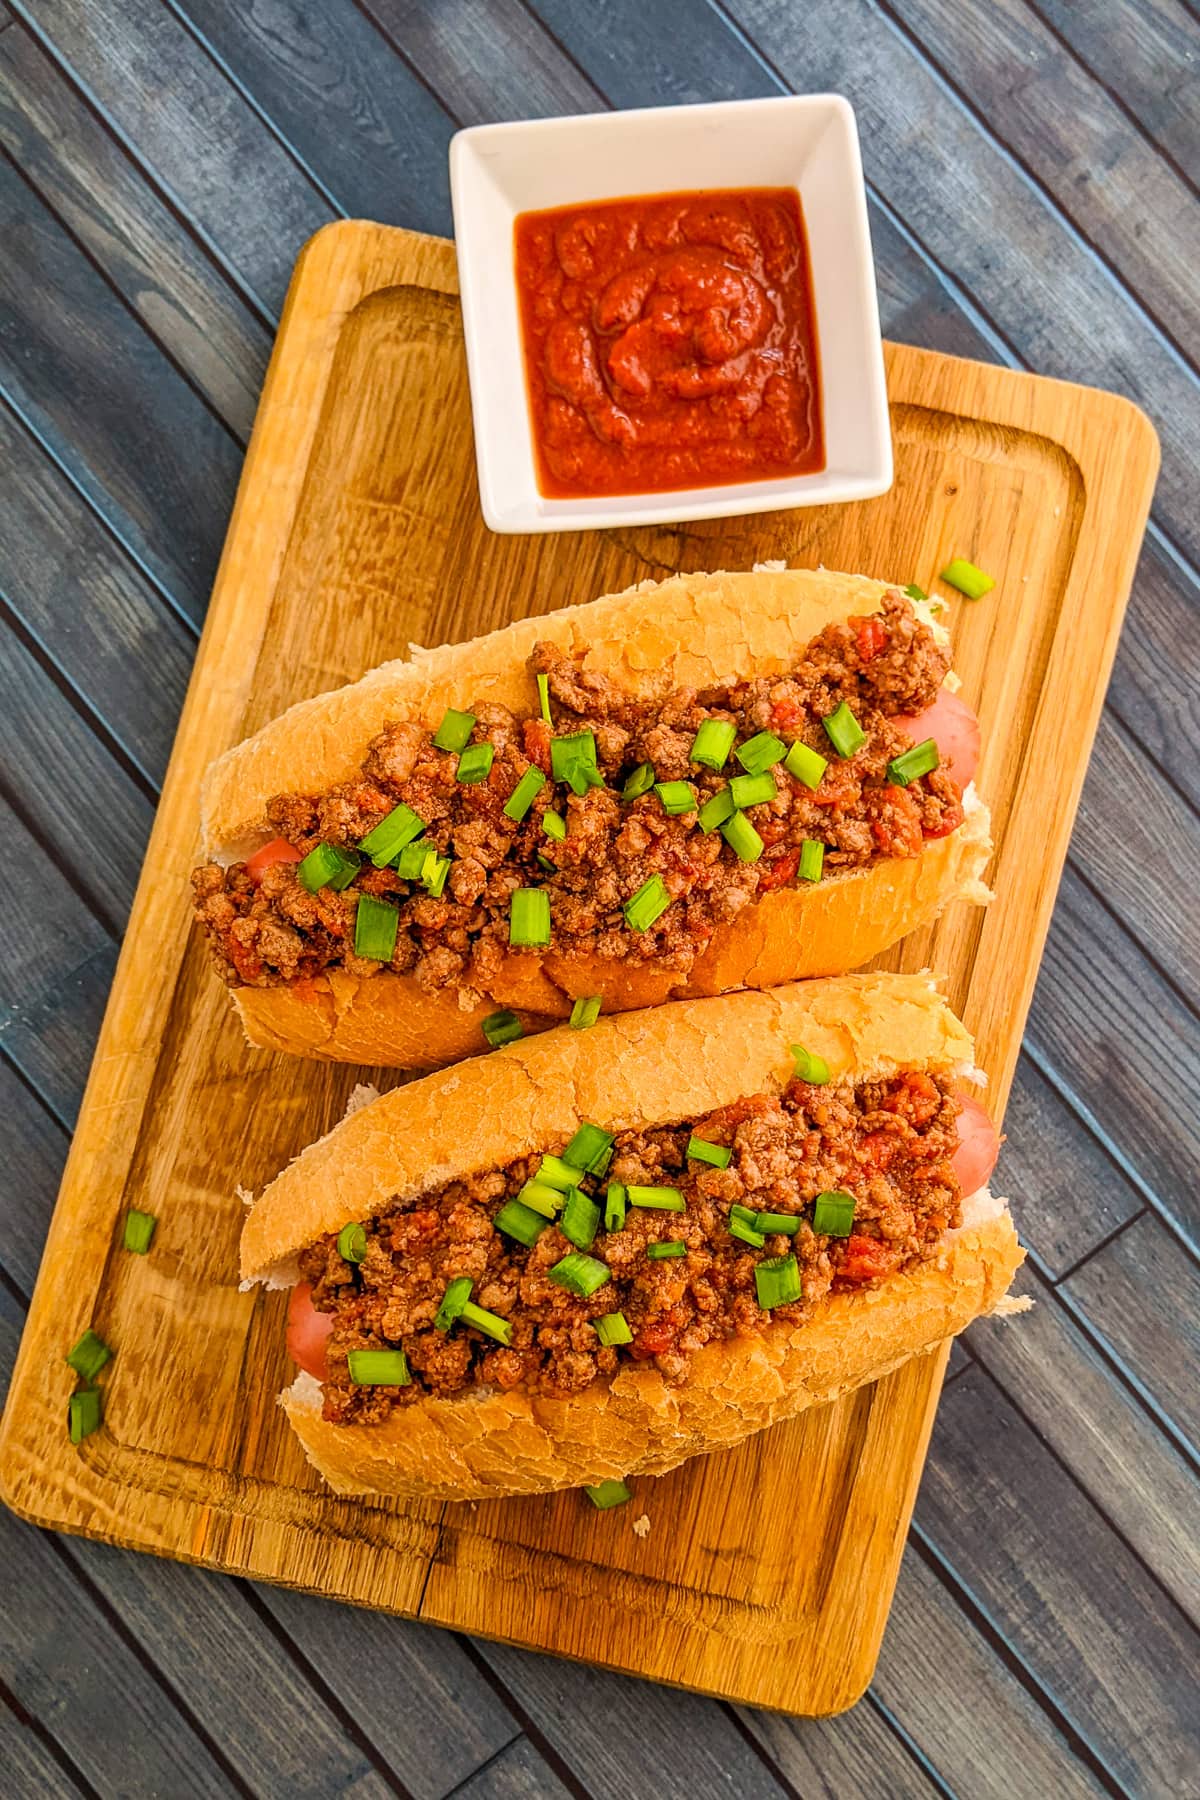 Top view of hot dog with chopped onions on a cutting board.